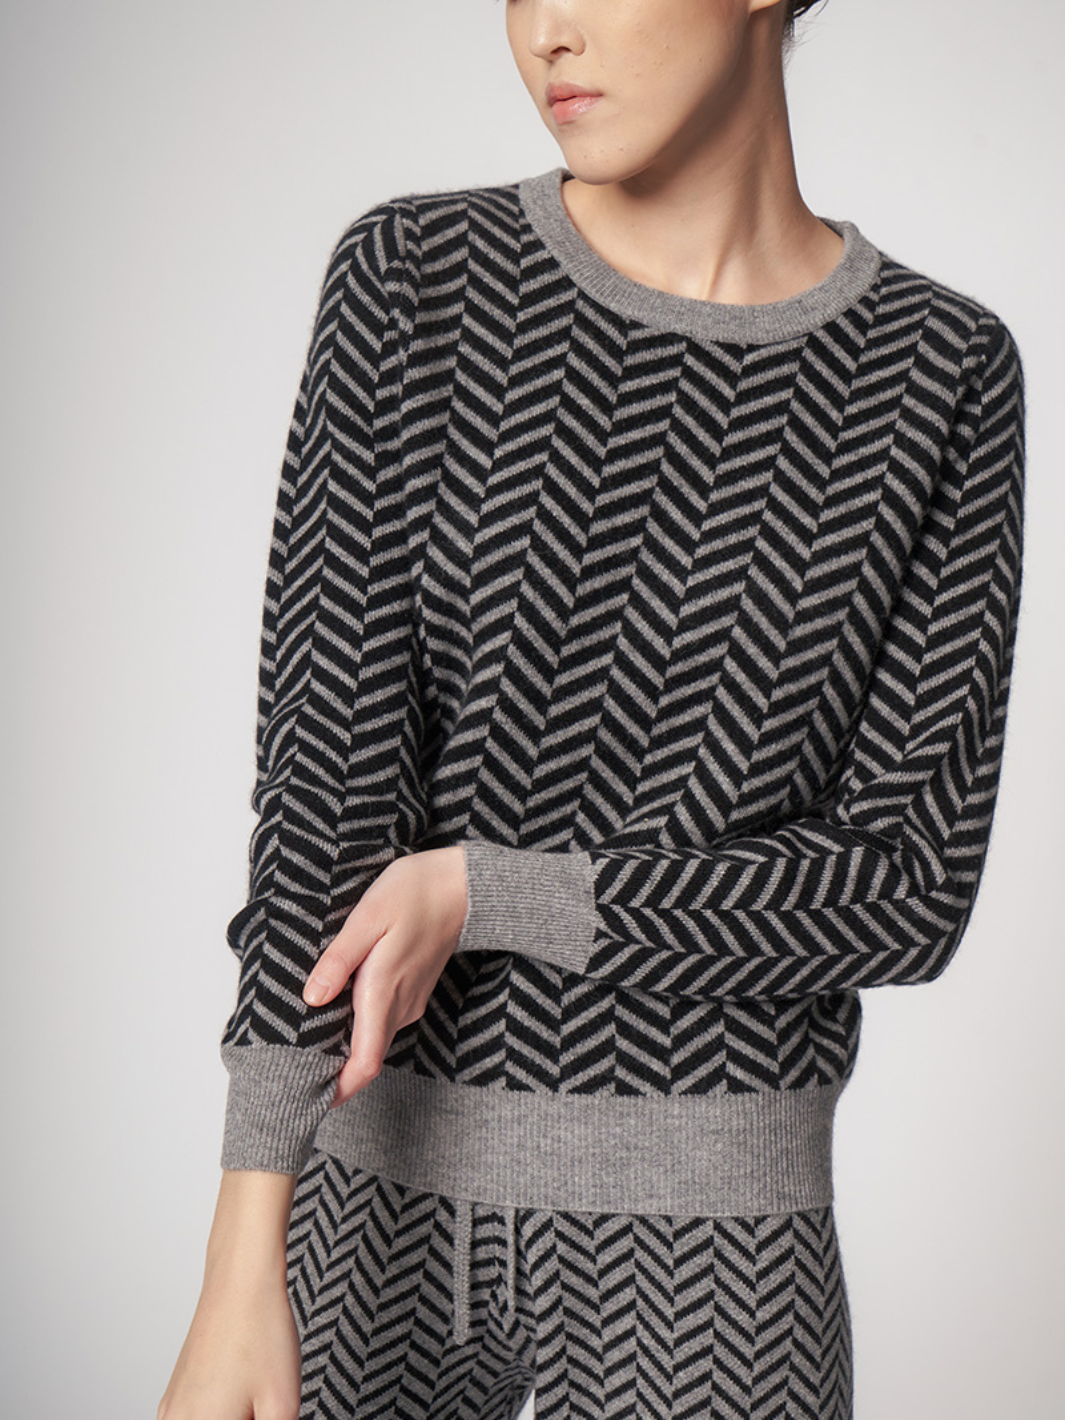 GRAYLING TOP IN GREY BLACK - Romi Boutique